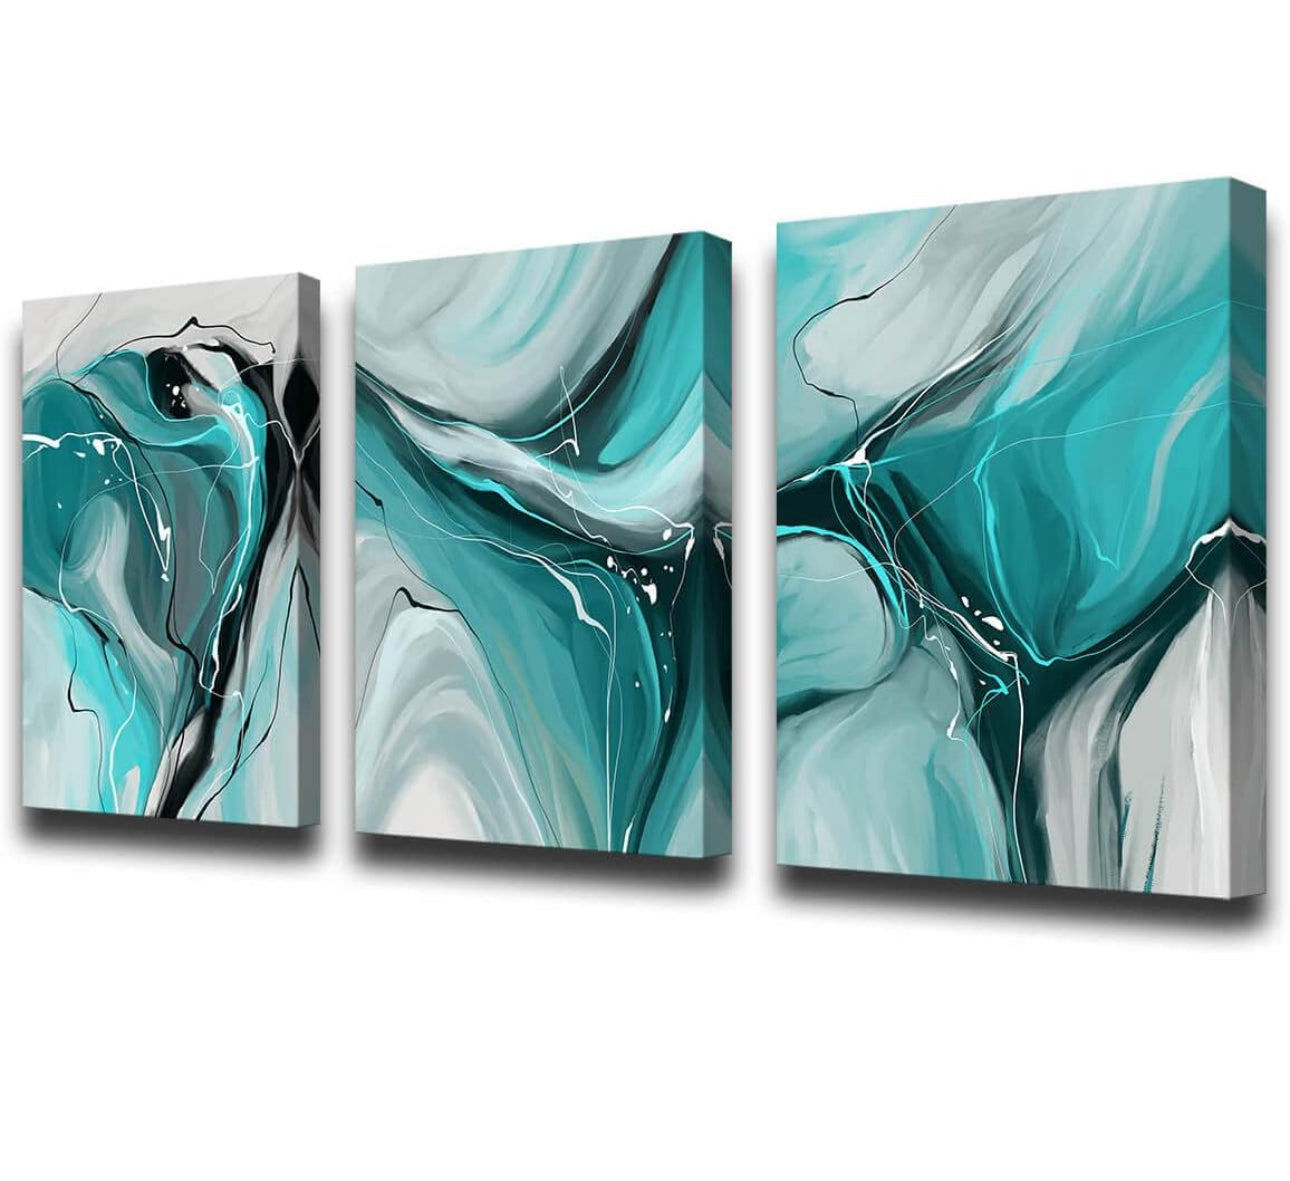 Teal Abstract Watercolor canvas Wall Art 12x16 Inch/Set of 3,Wall Decor Painting